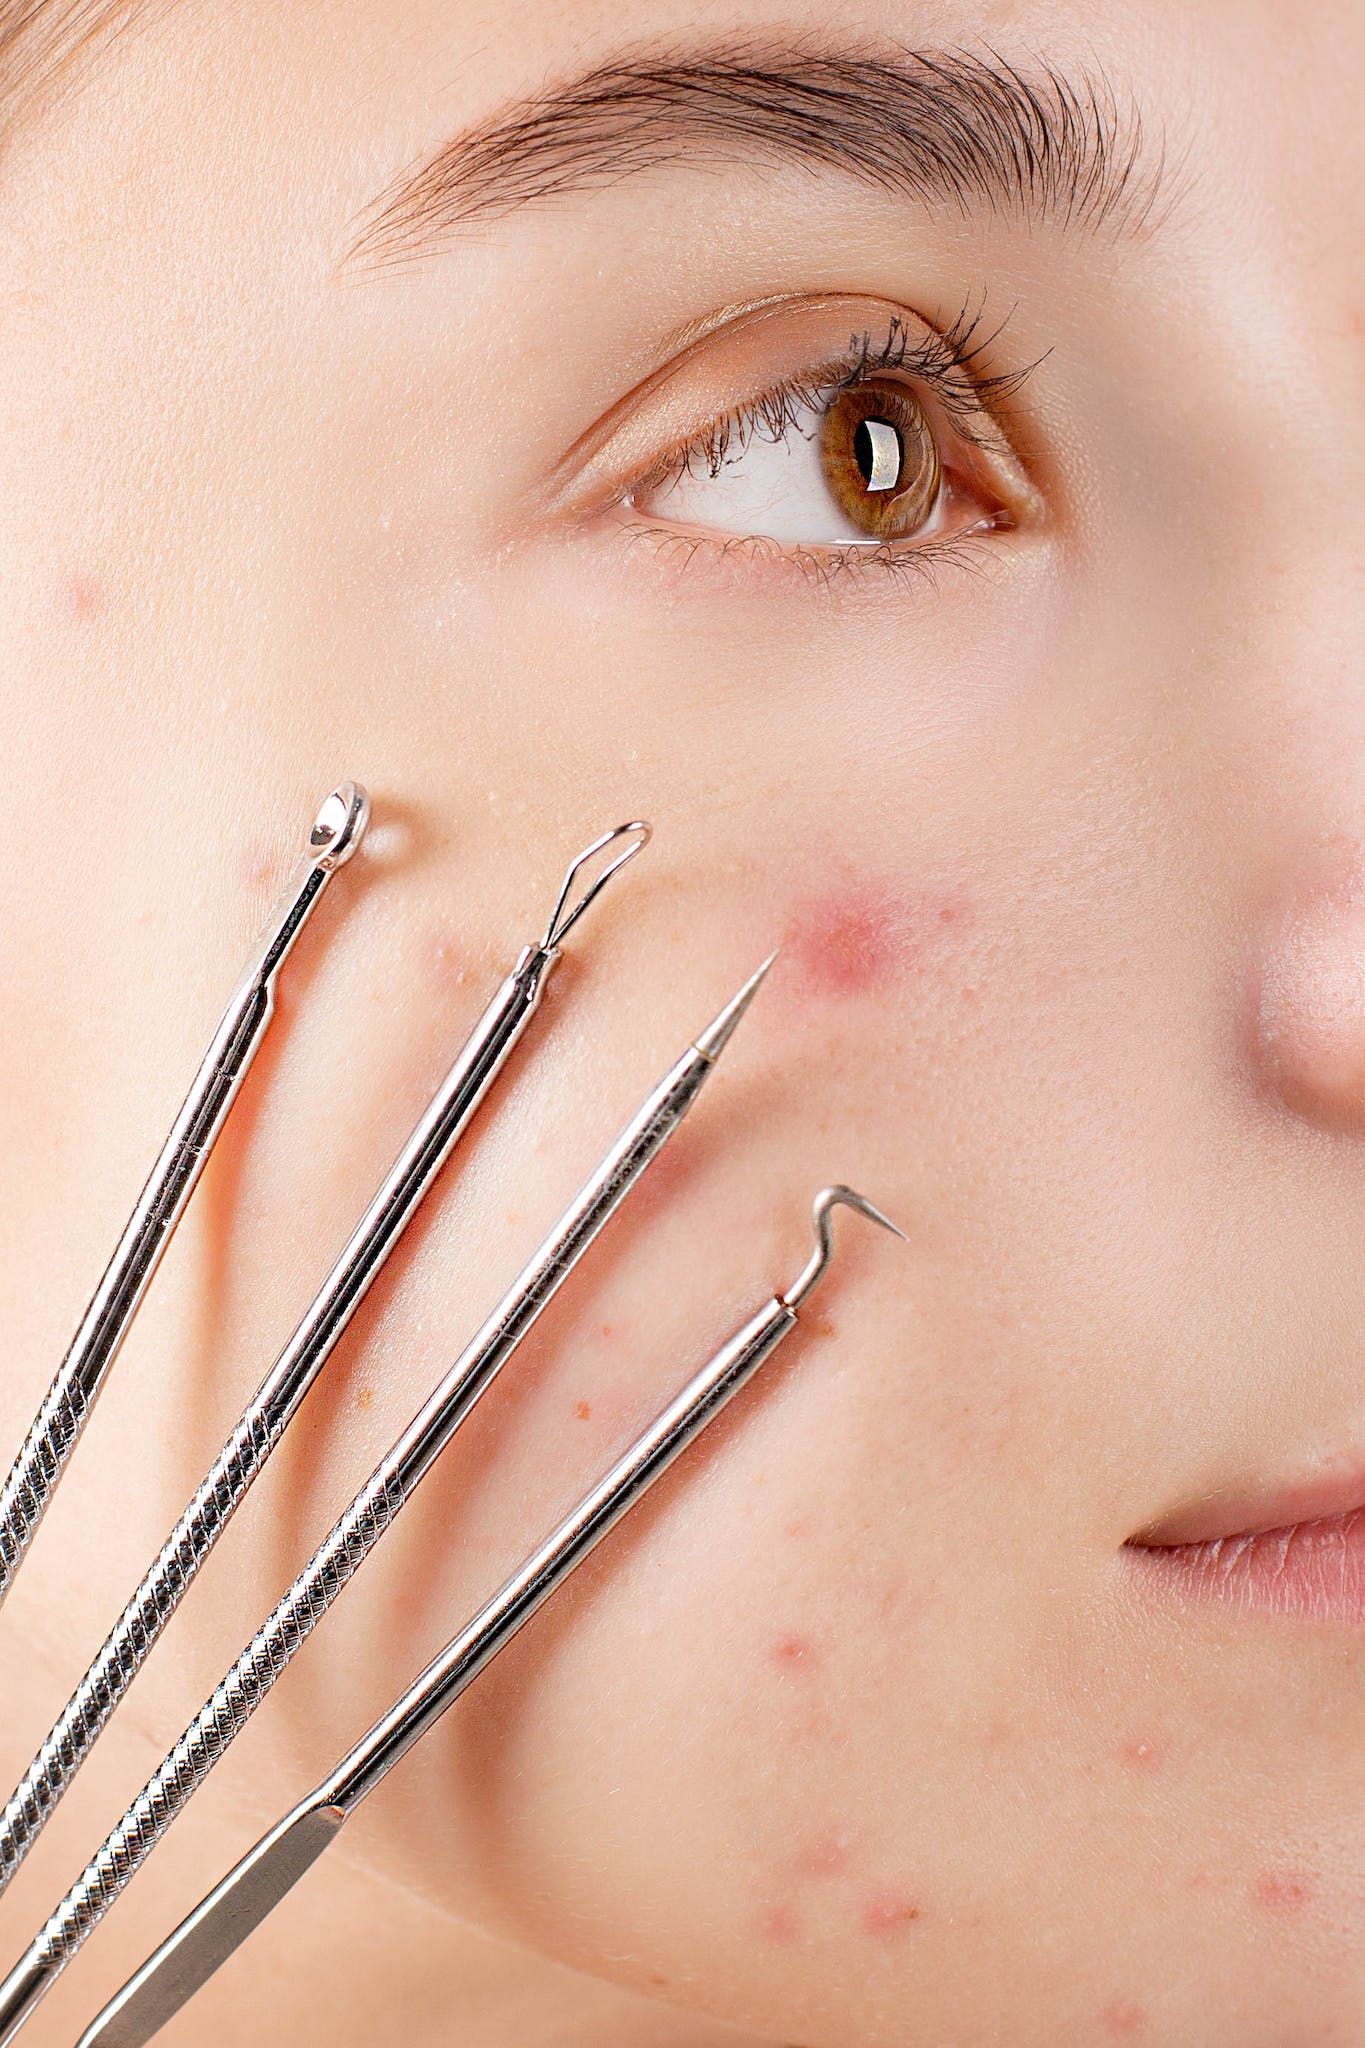 Can Skin Tags Be Removed Naturally